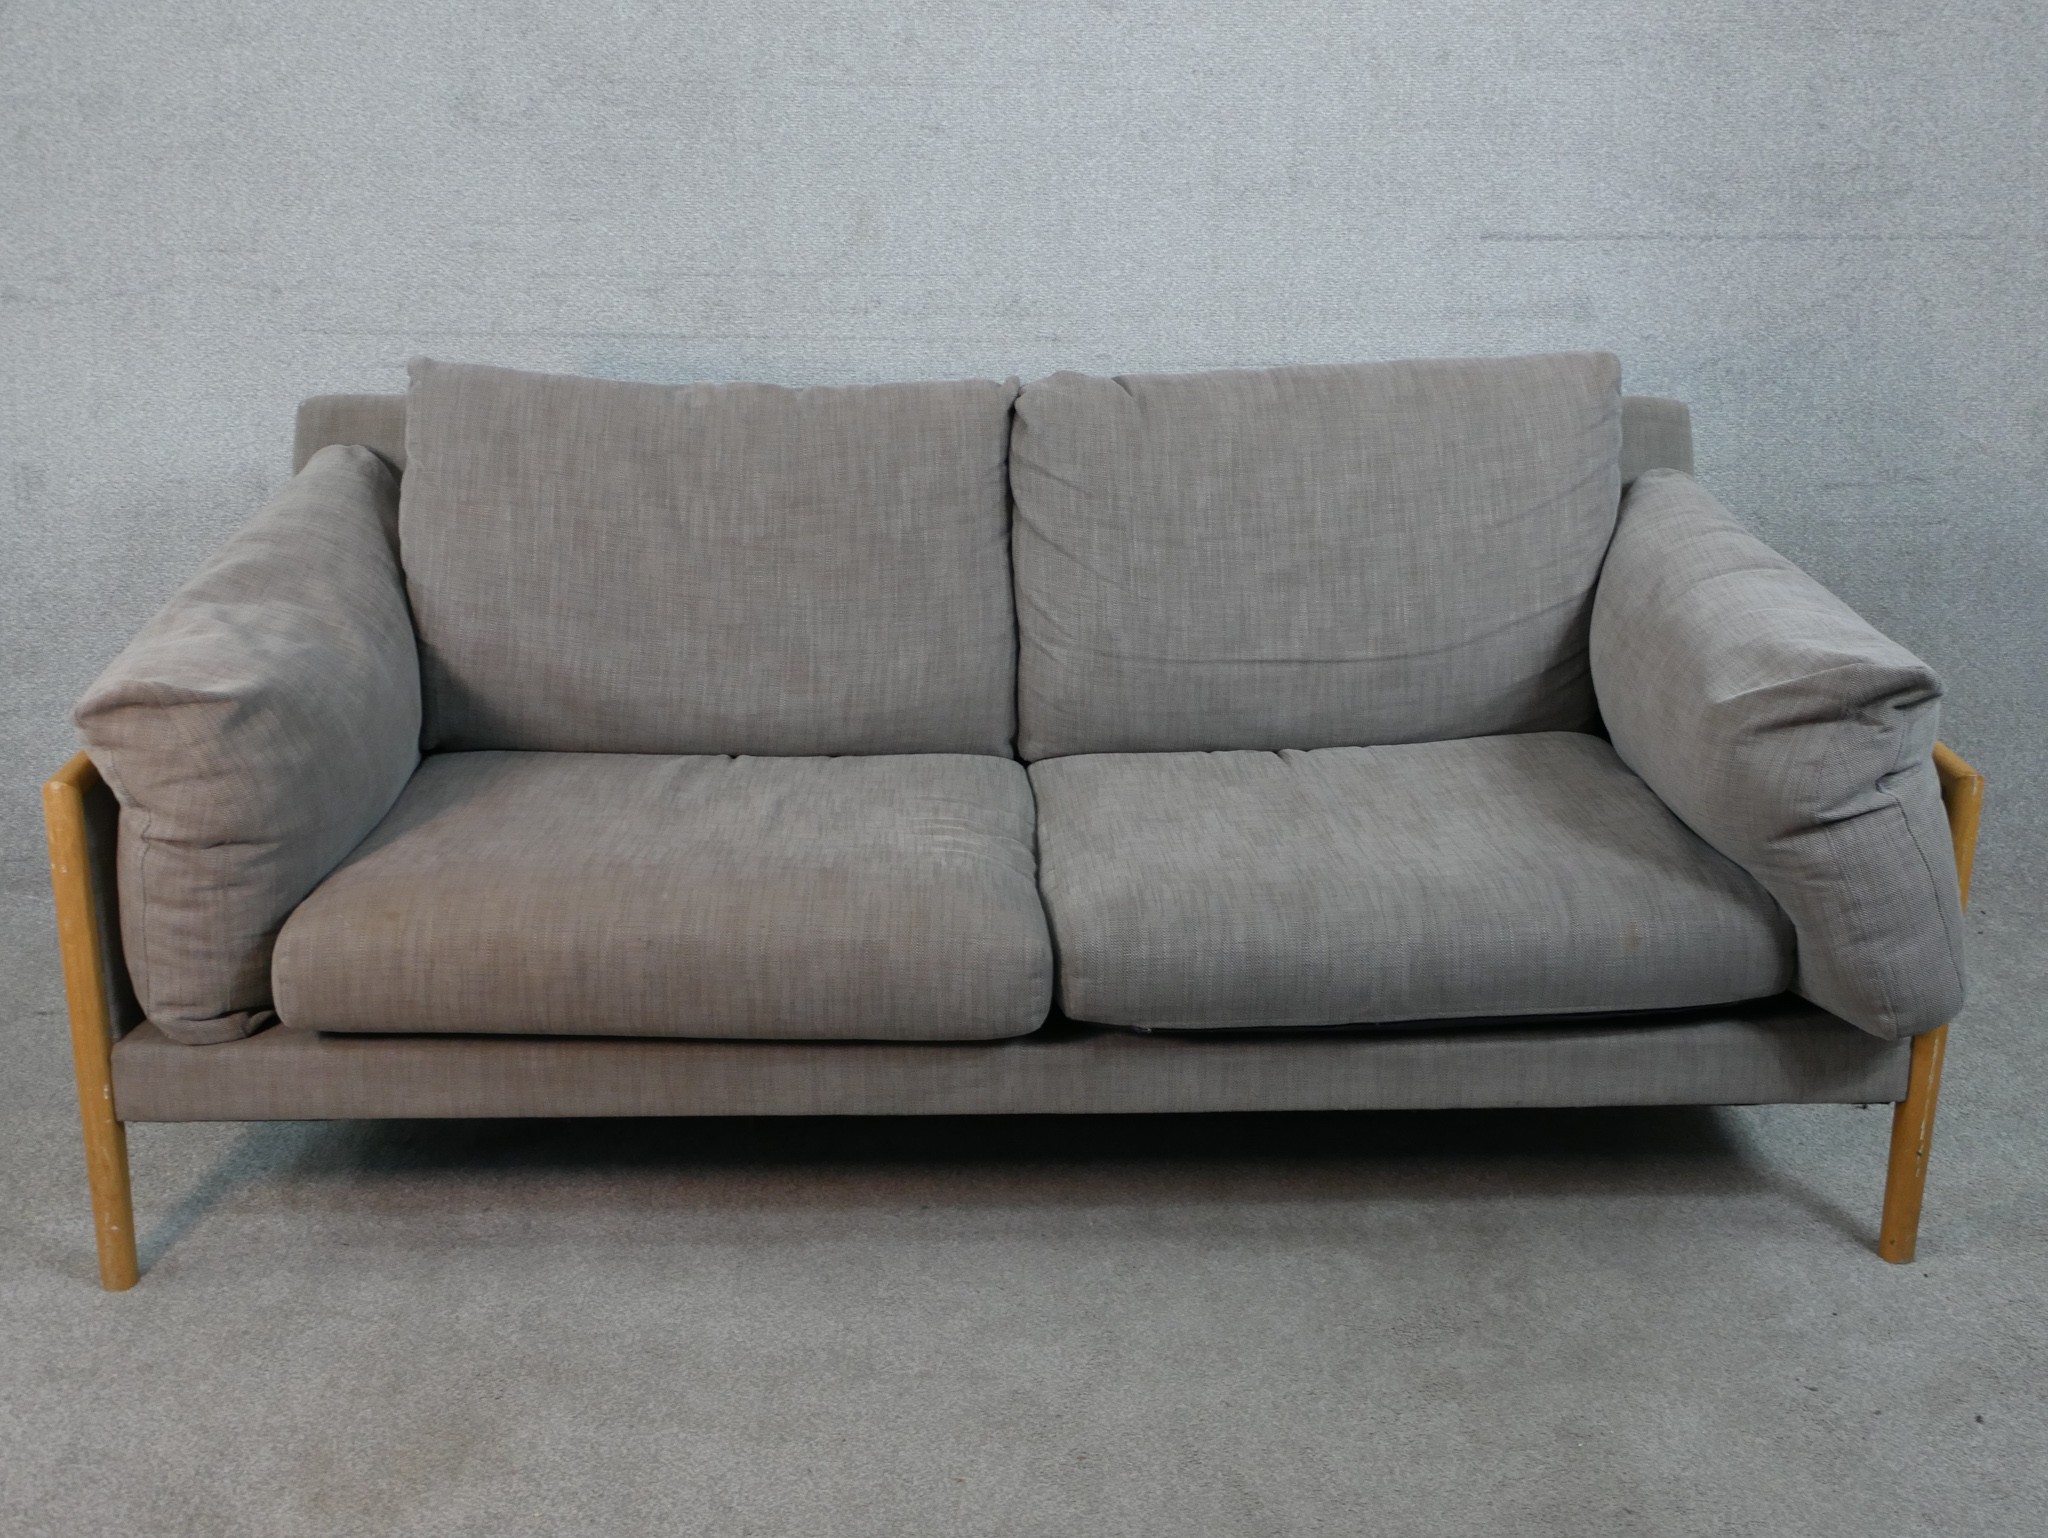 A John Lewis two seater sofa, upholstered in grey fabric, with oak arms and legs. H.77 W.192 D.88cm